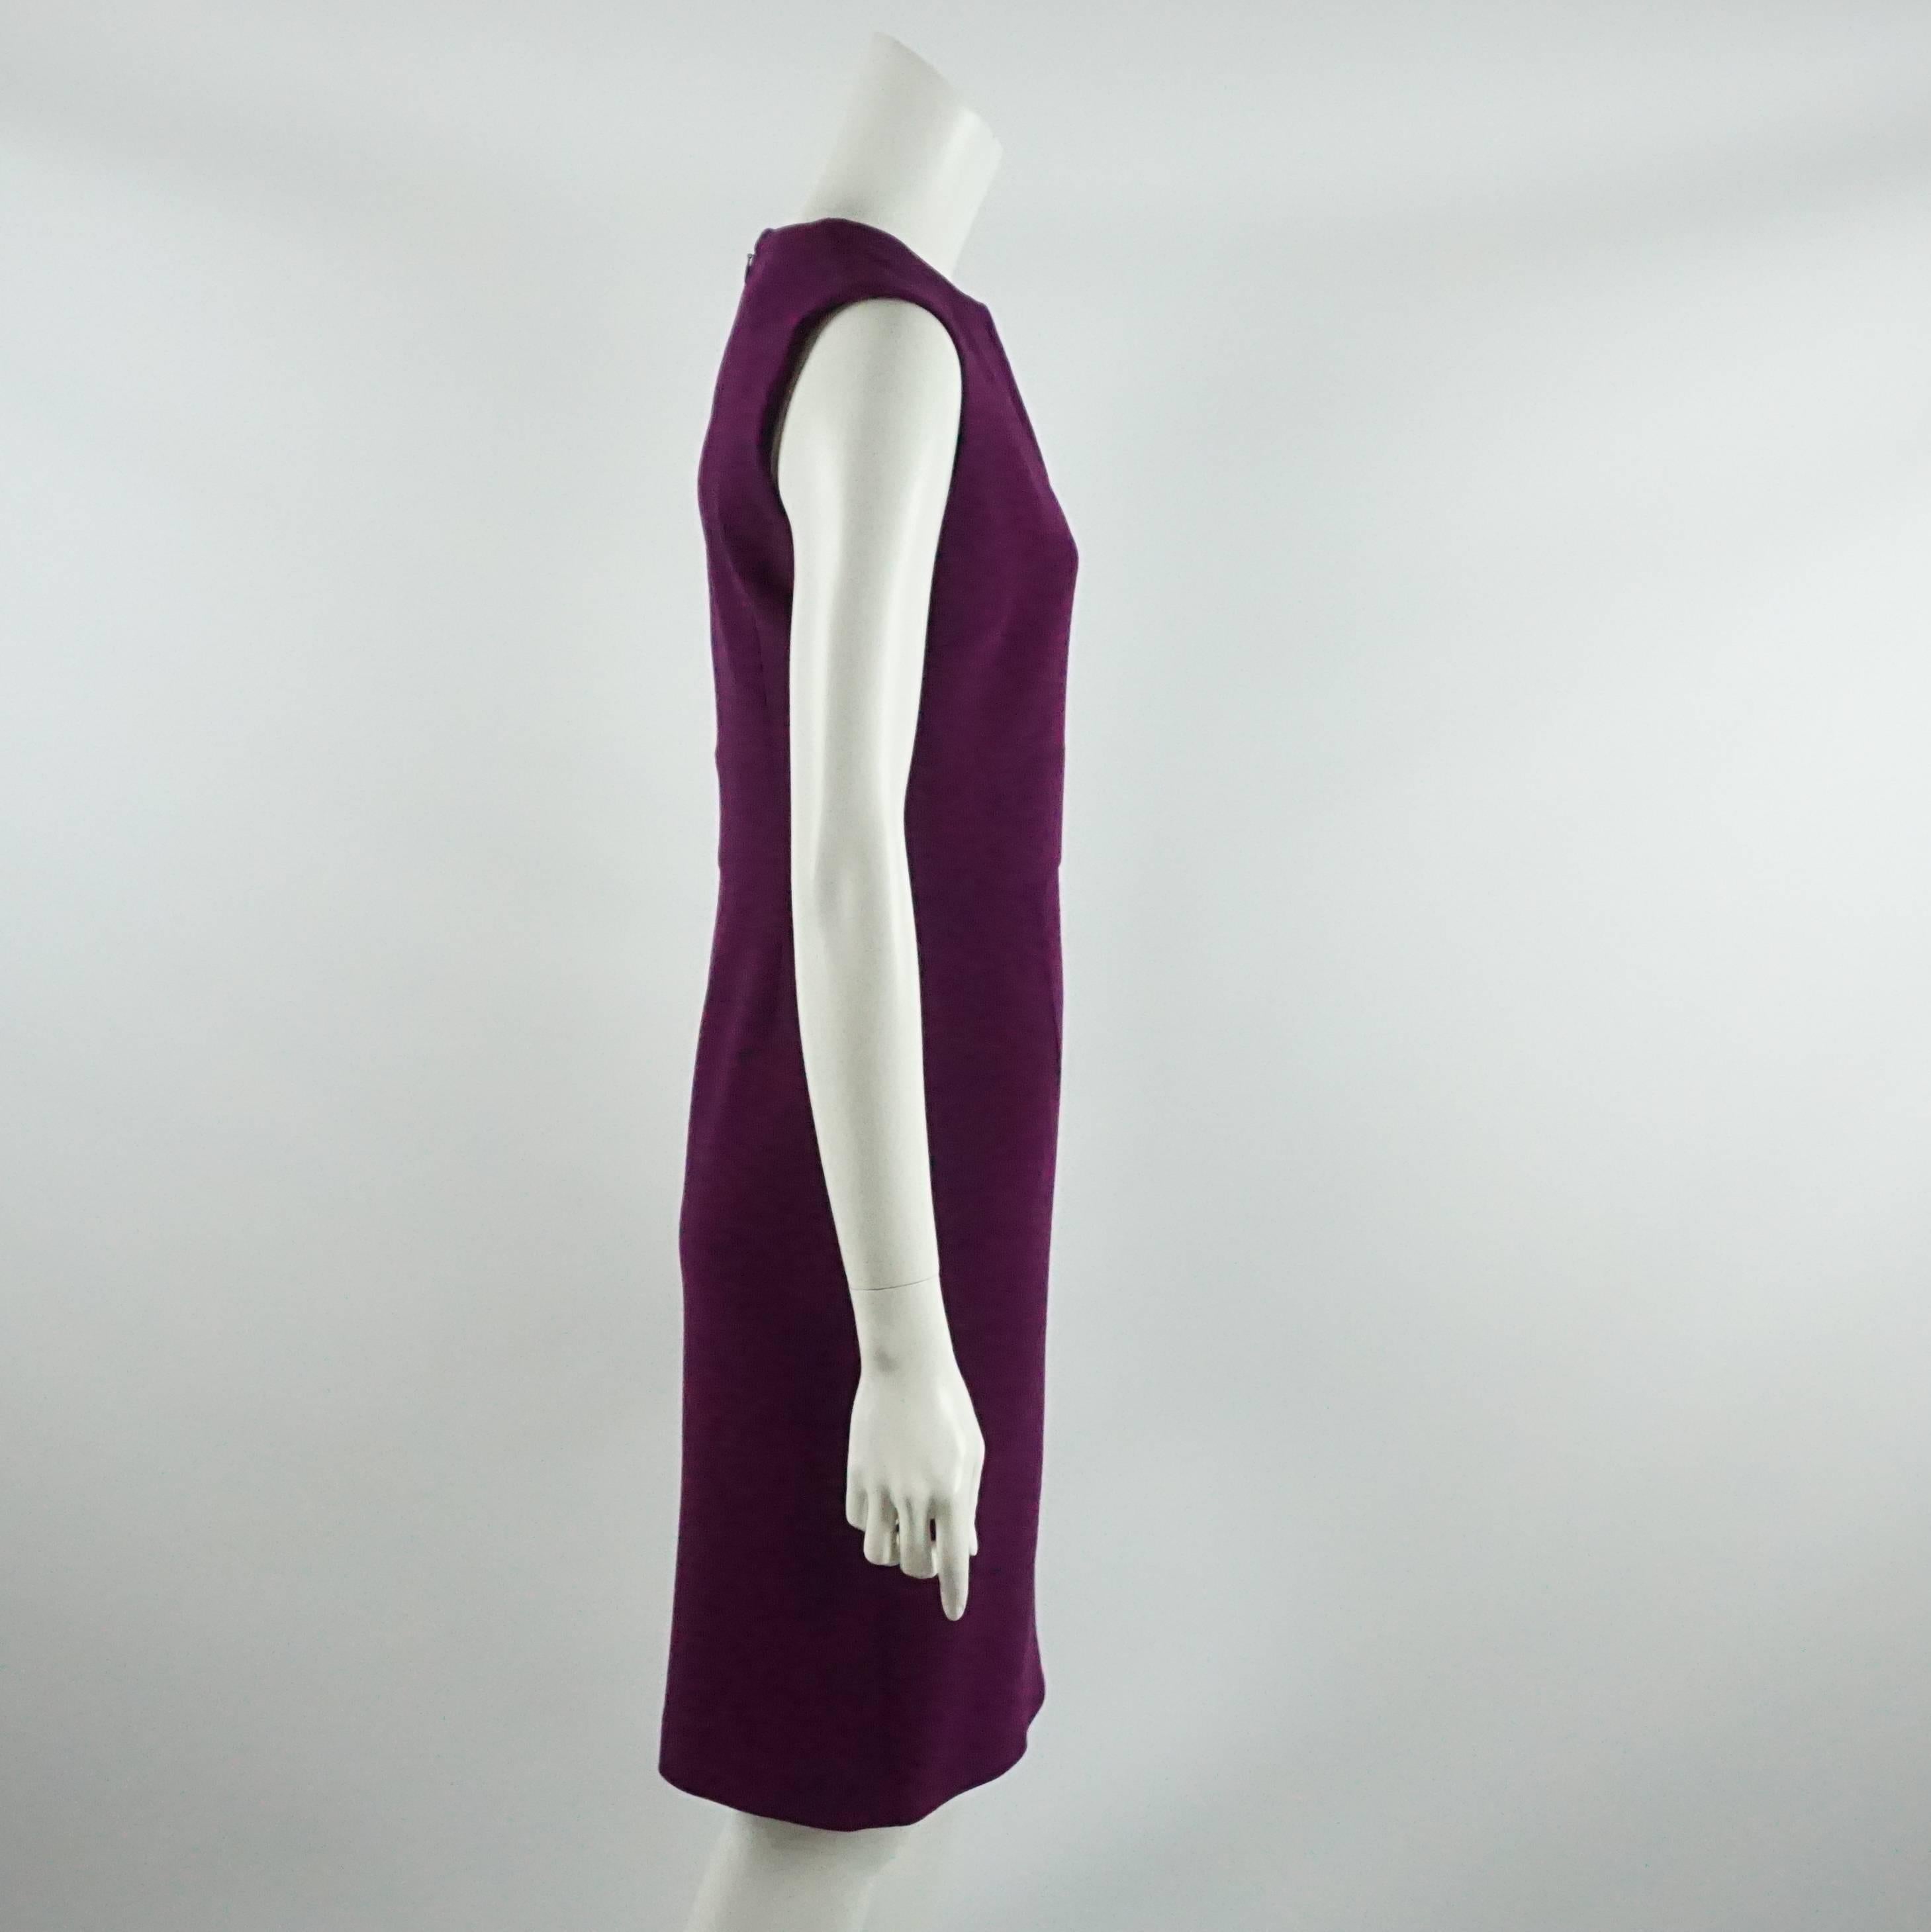 This Agnona dress is purple wool and features a v-neck. It is tapered at the waist and, on the back, has a slight pleat and a slit. This dress is in excellent condition.

Measurements
Bust: 36